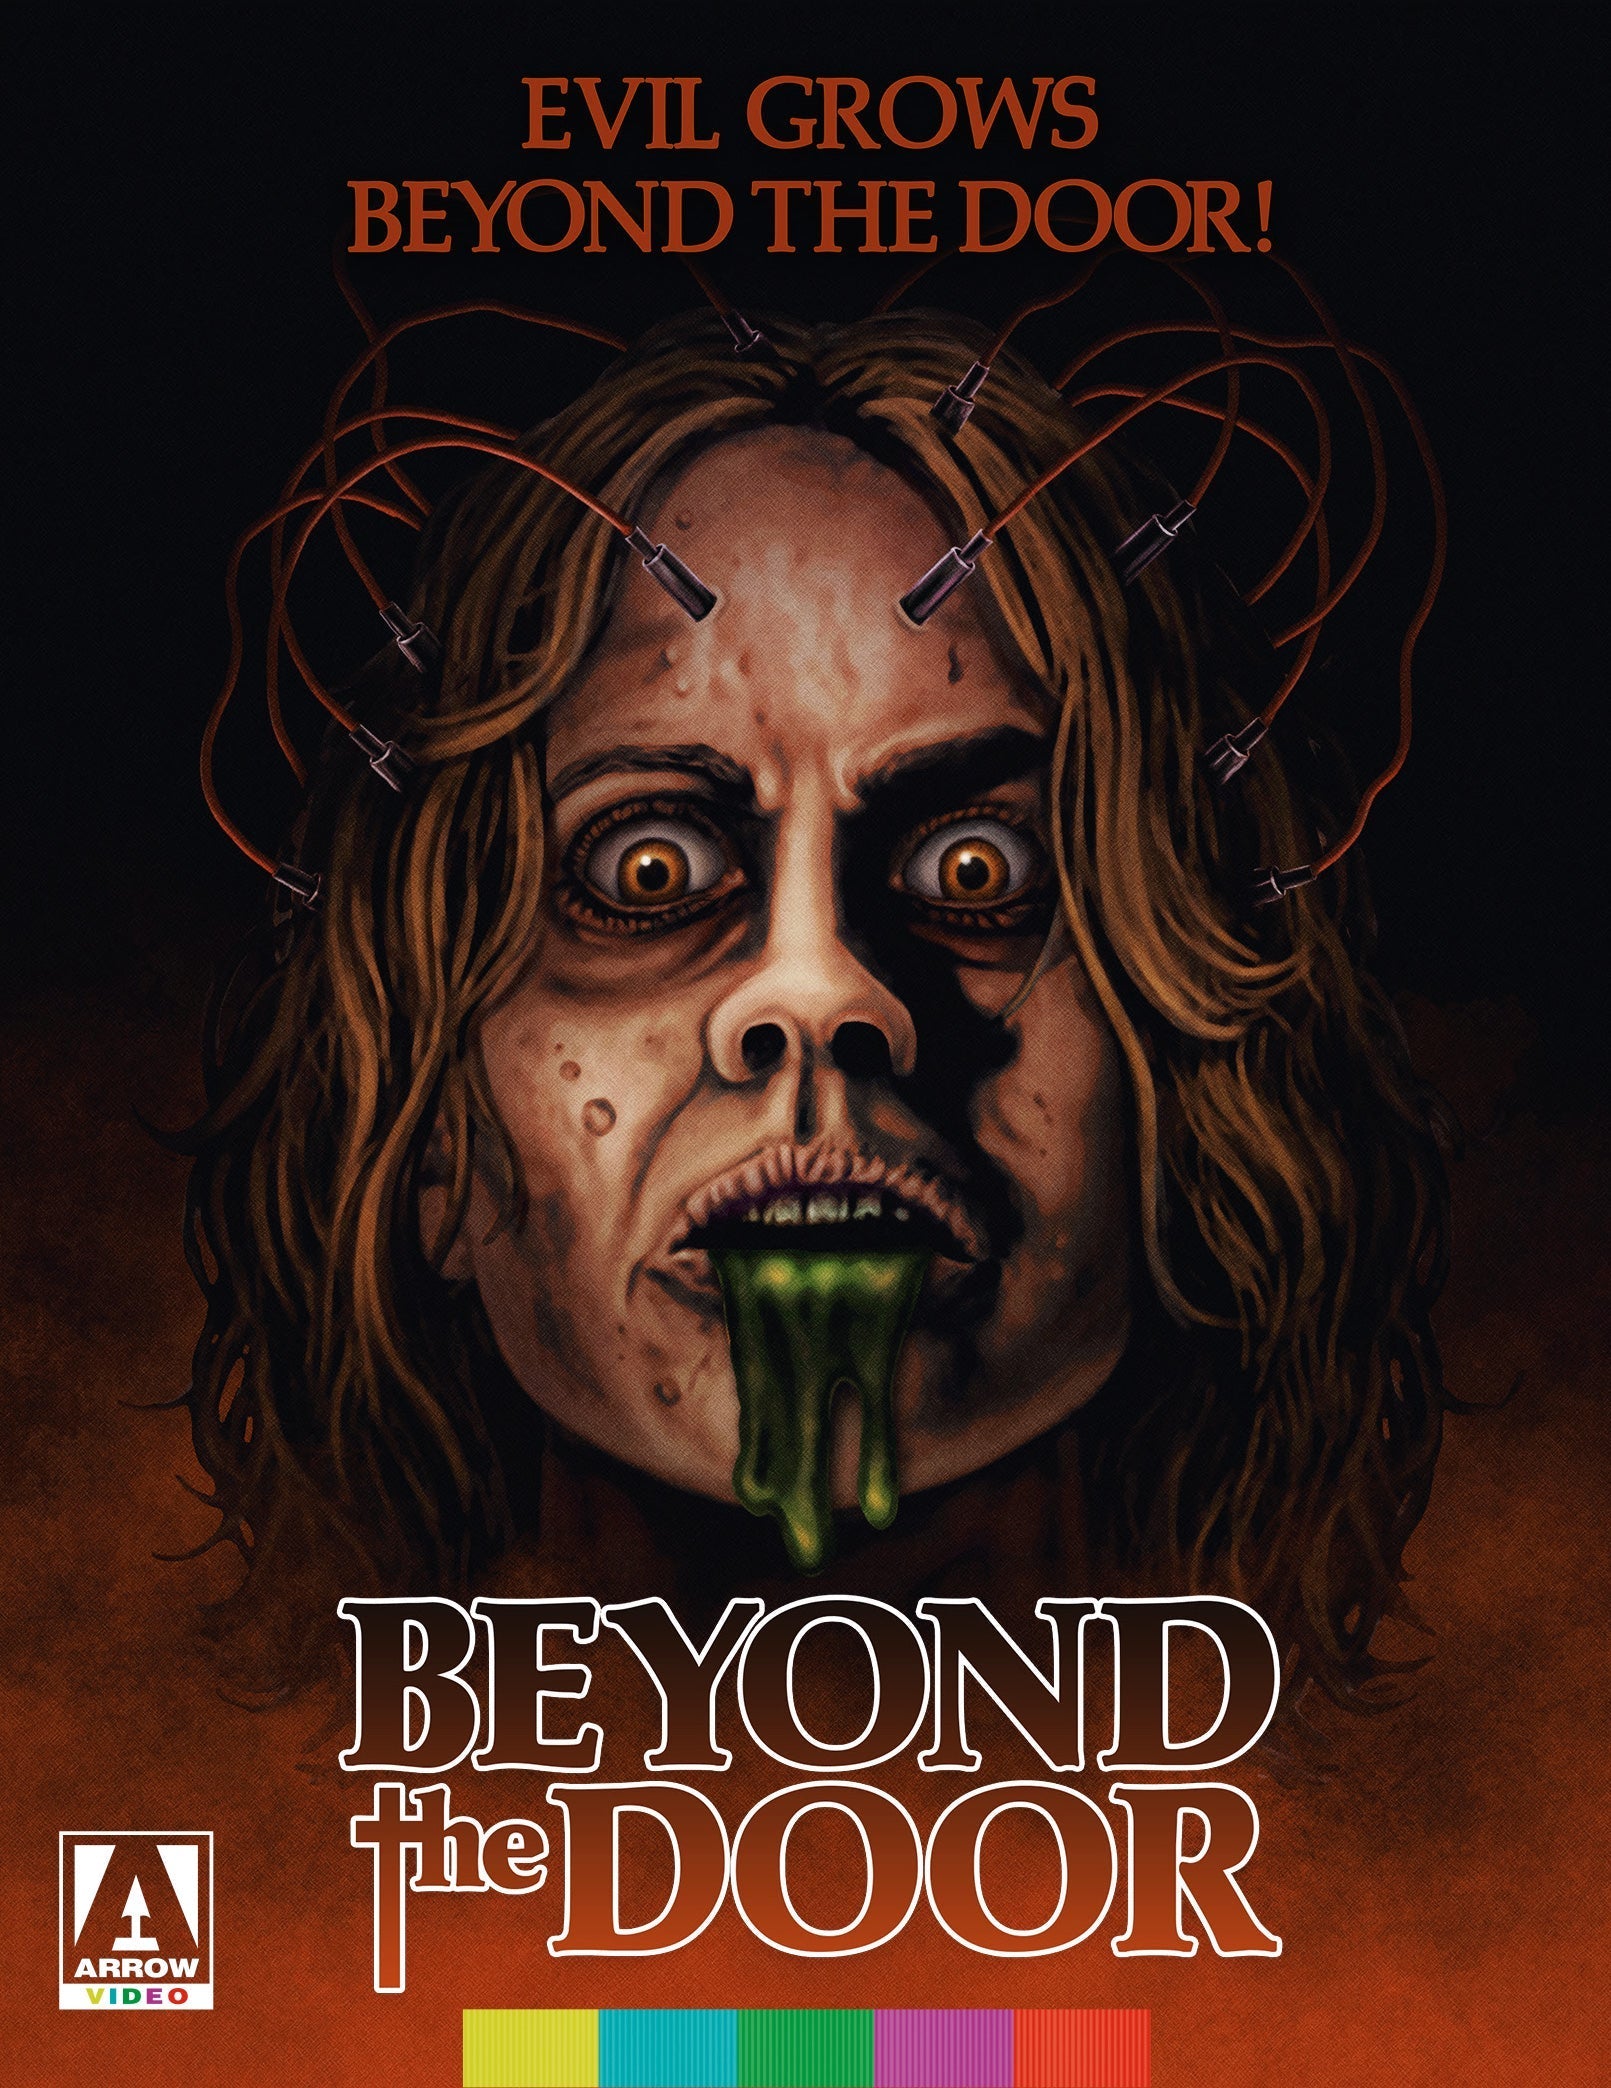 Beyond The Door (Limited Edition) Blu-Ray Blu-Ray